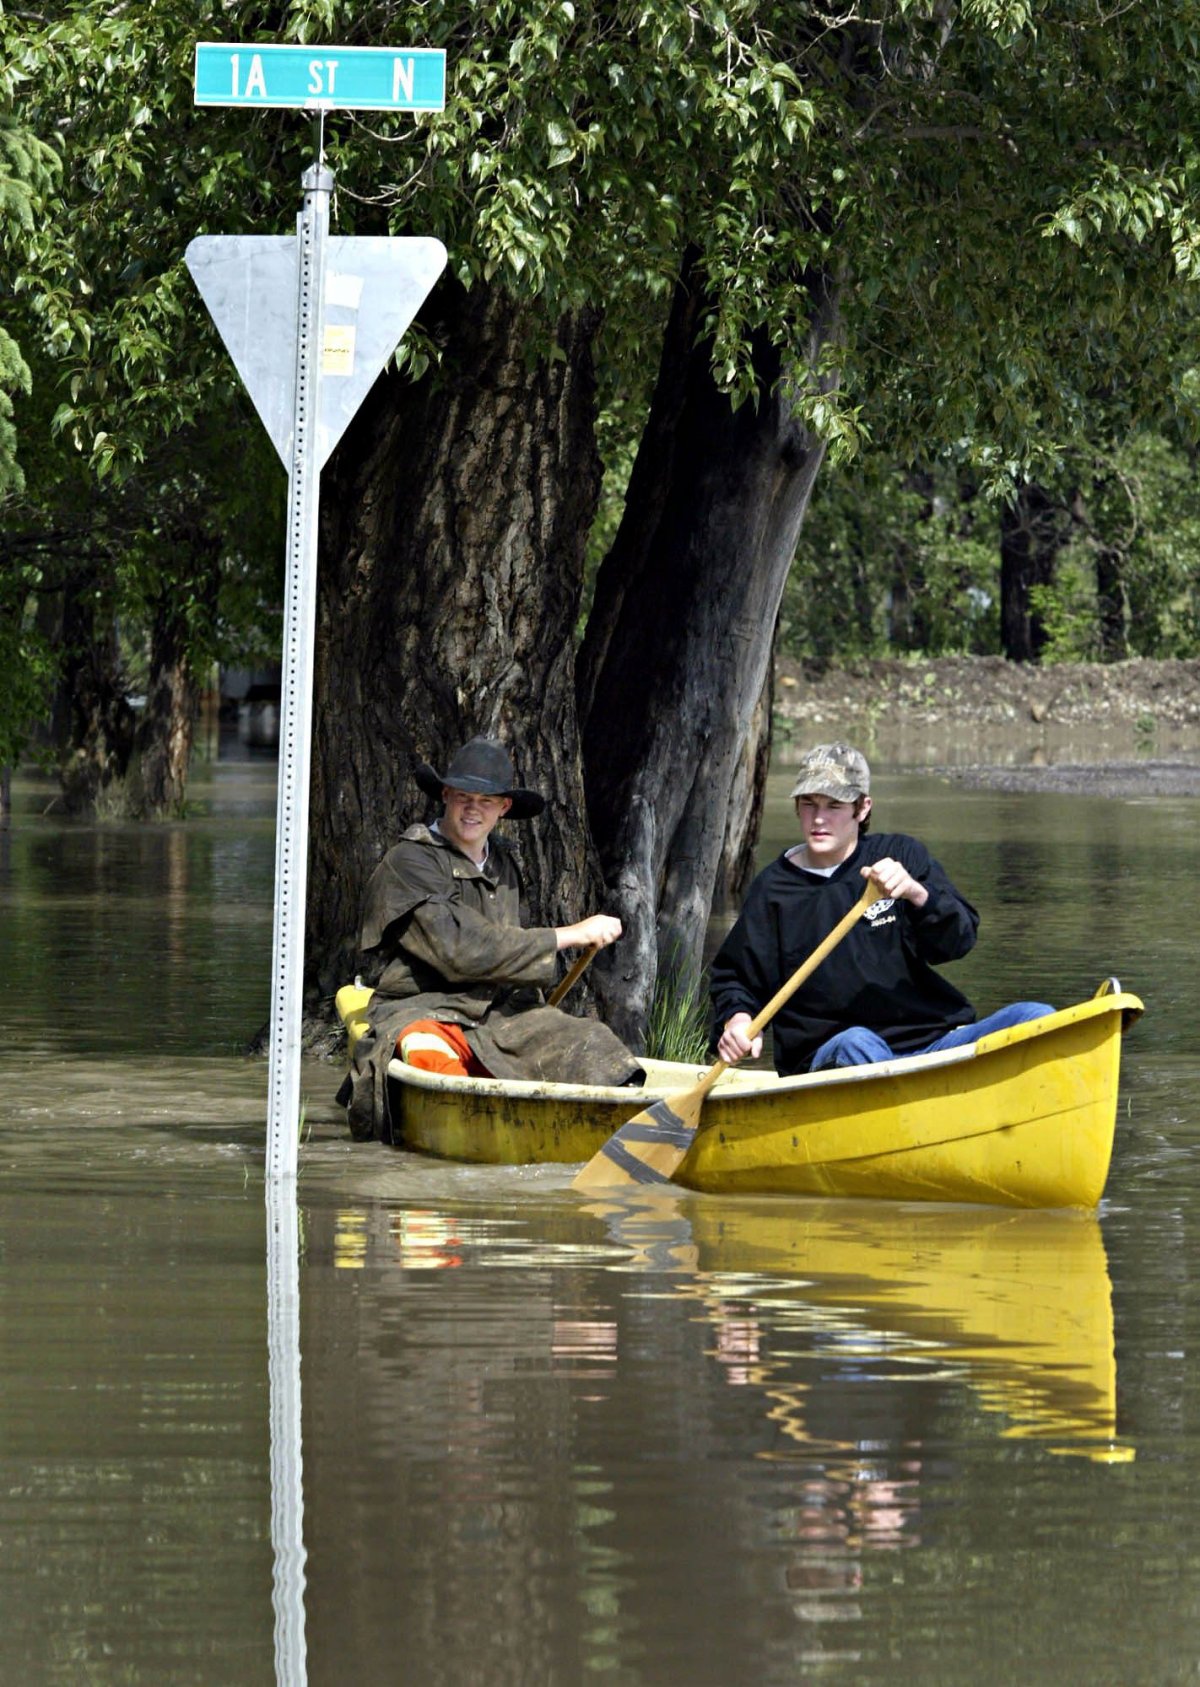 Aaron Ferguson, 17, right, and Mike Weeks, 18, paddle through flood waters in a High River, Alta., community on Wednesday, June 8, 2005. A section of the southern Alberta town was evacuated on Tuesday following a week of heavy rains  and residents are slowly being allowed back into their homes Wednesday.